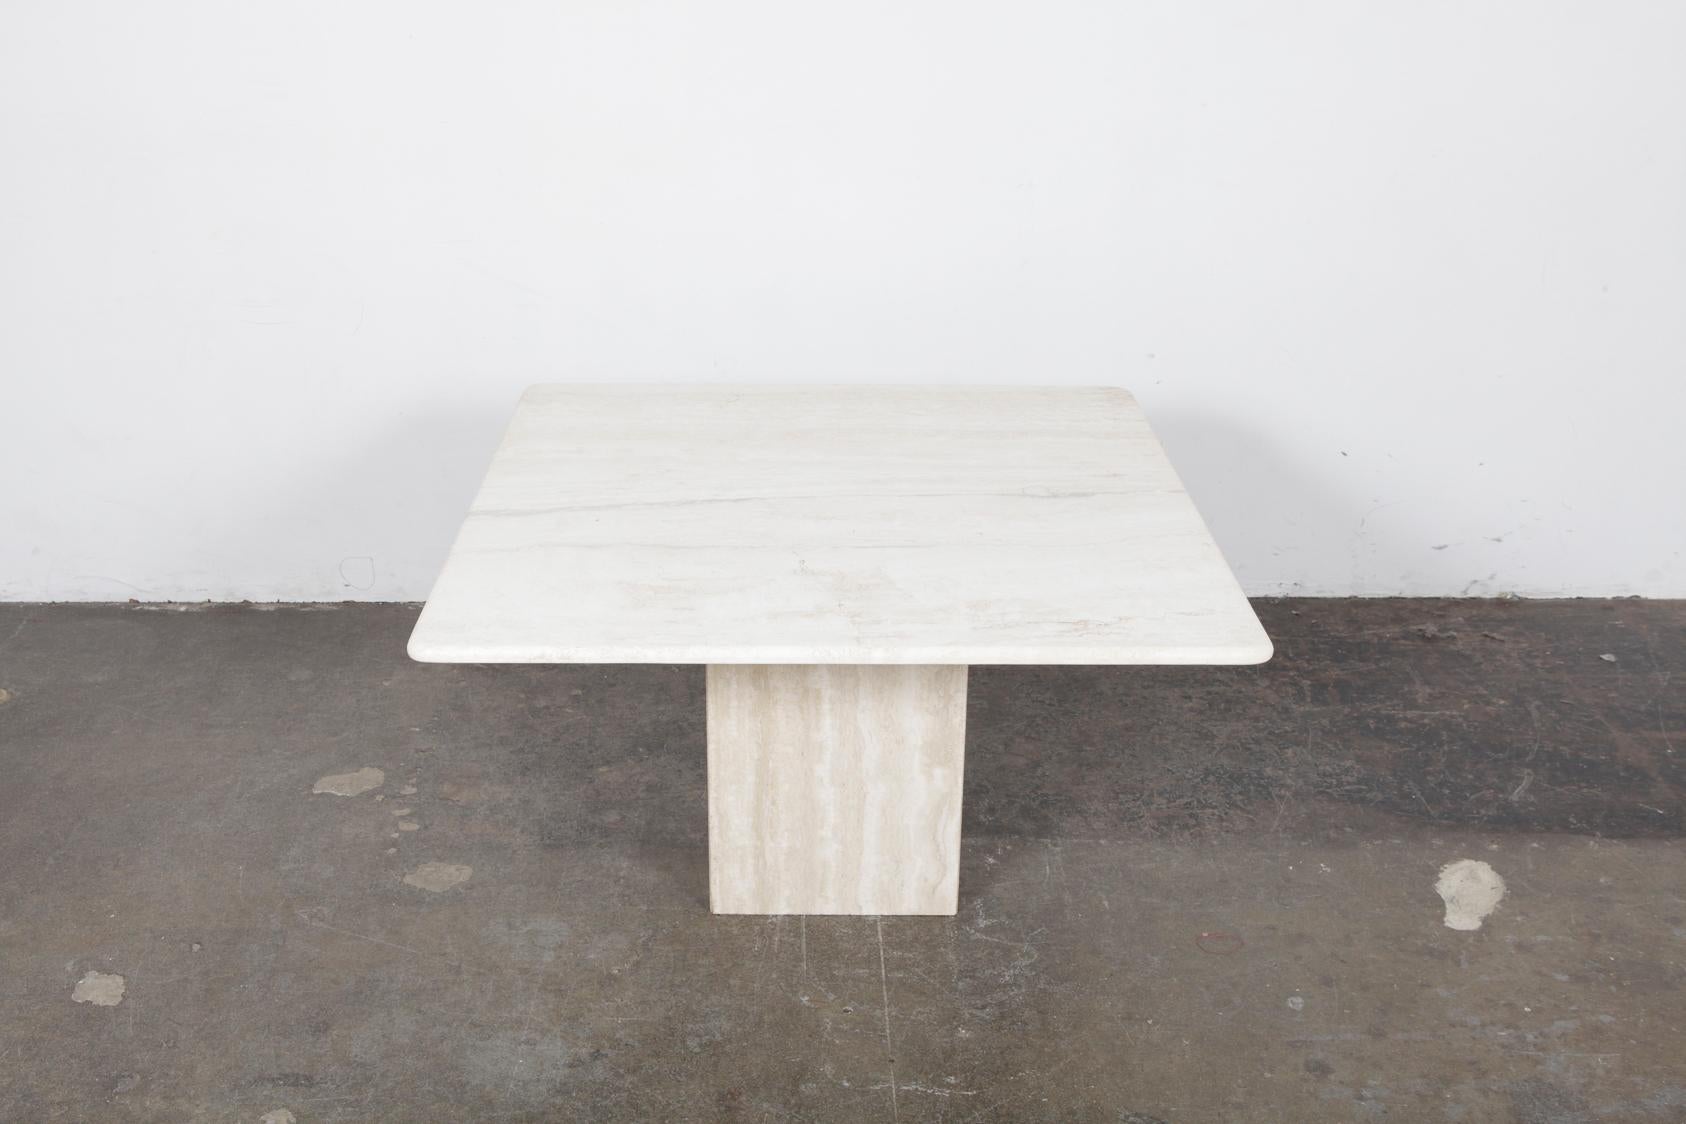 Beautiful Italian travertine coffee table, 1970s, with a square pedestal base and a slight beveled edge to the tabletop. In very nice vintage condition.